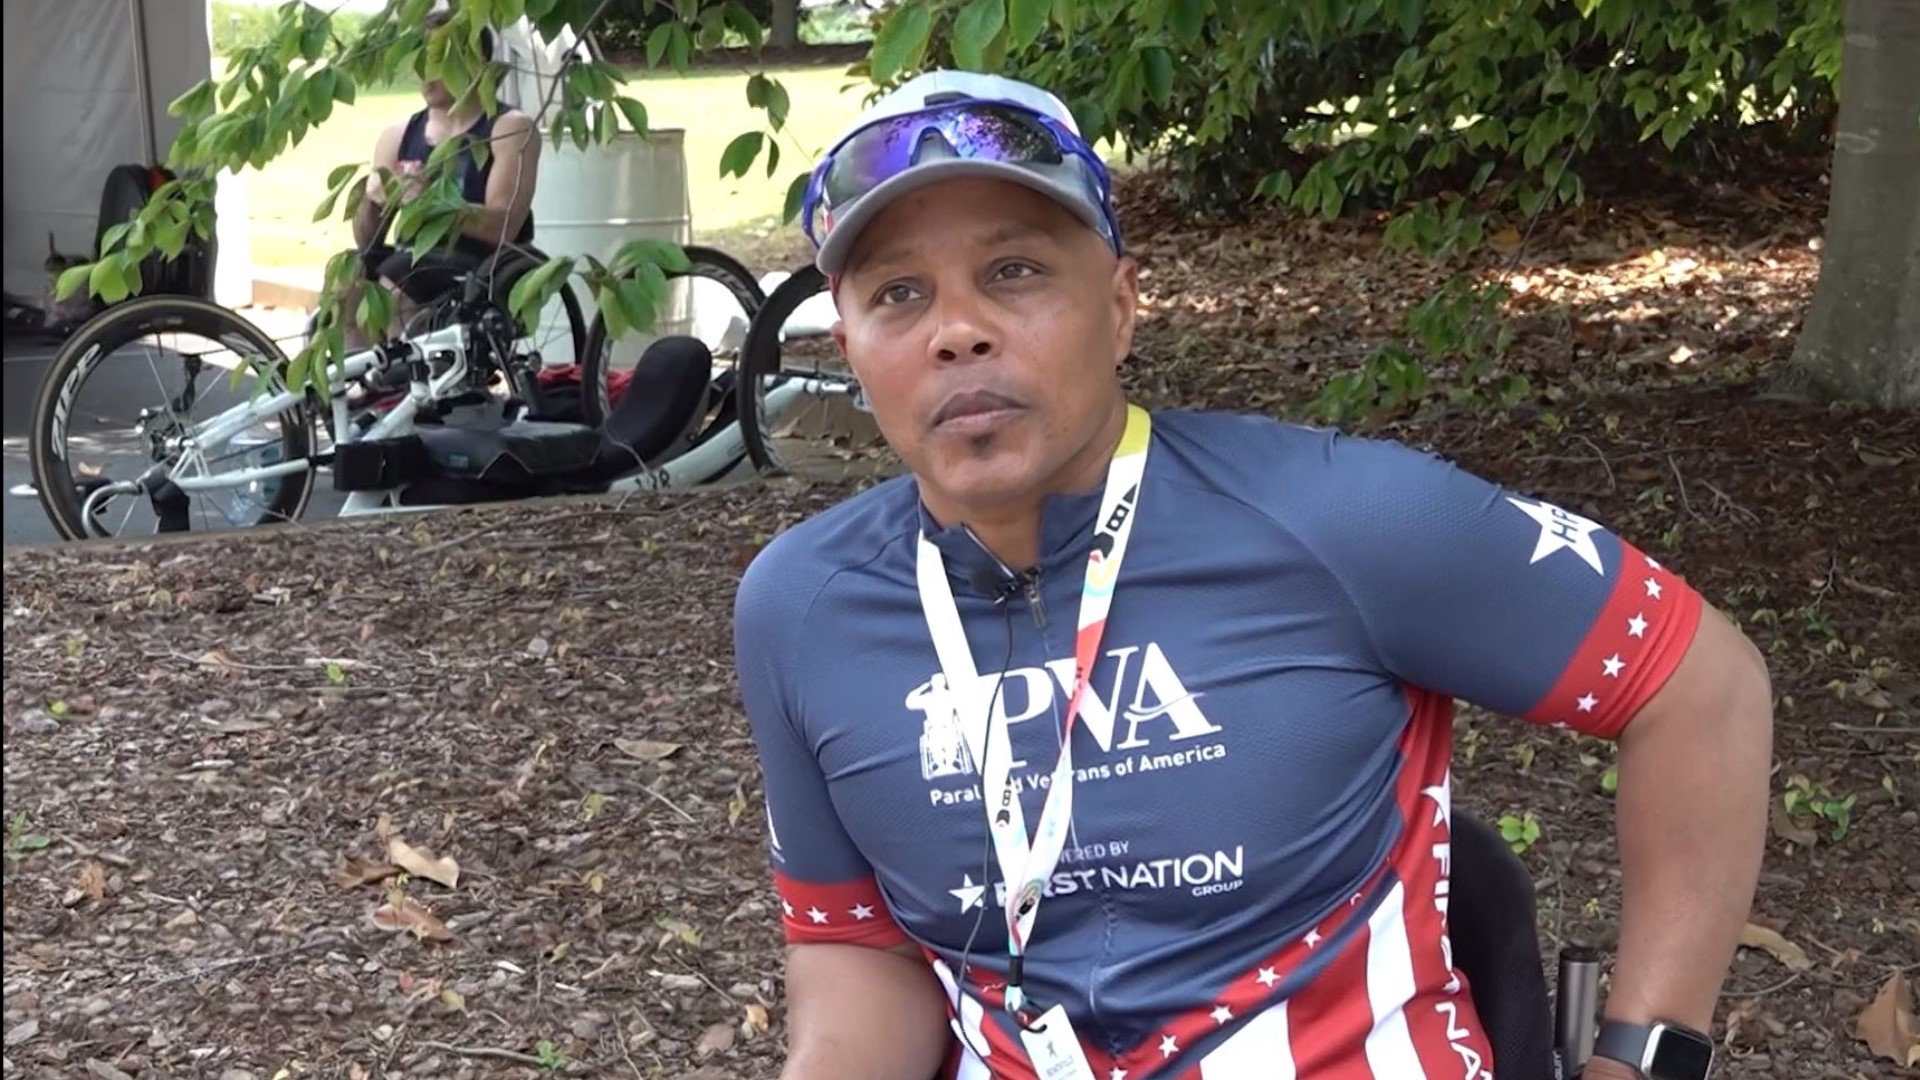 Hundreds of athletes will compete, including the Paralyzed Veterans of America.